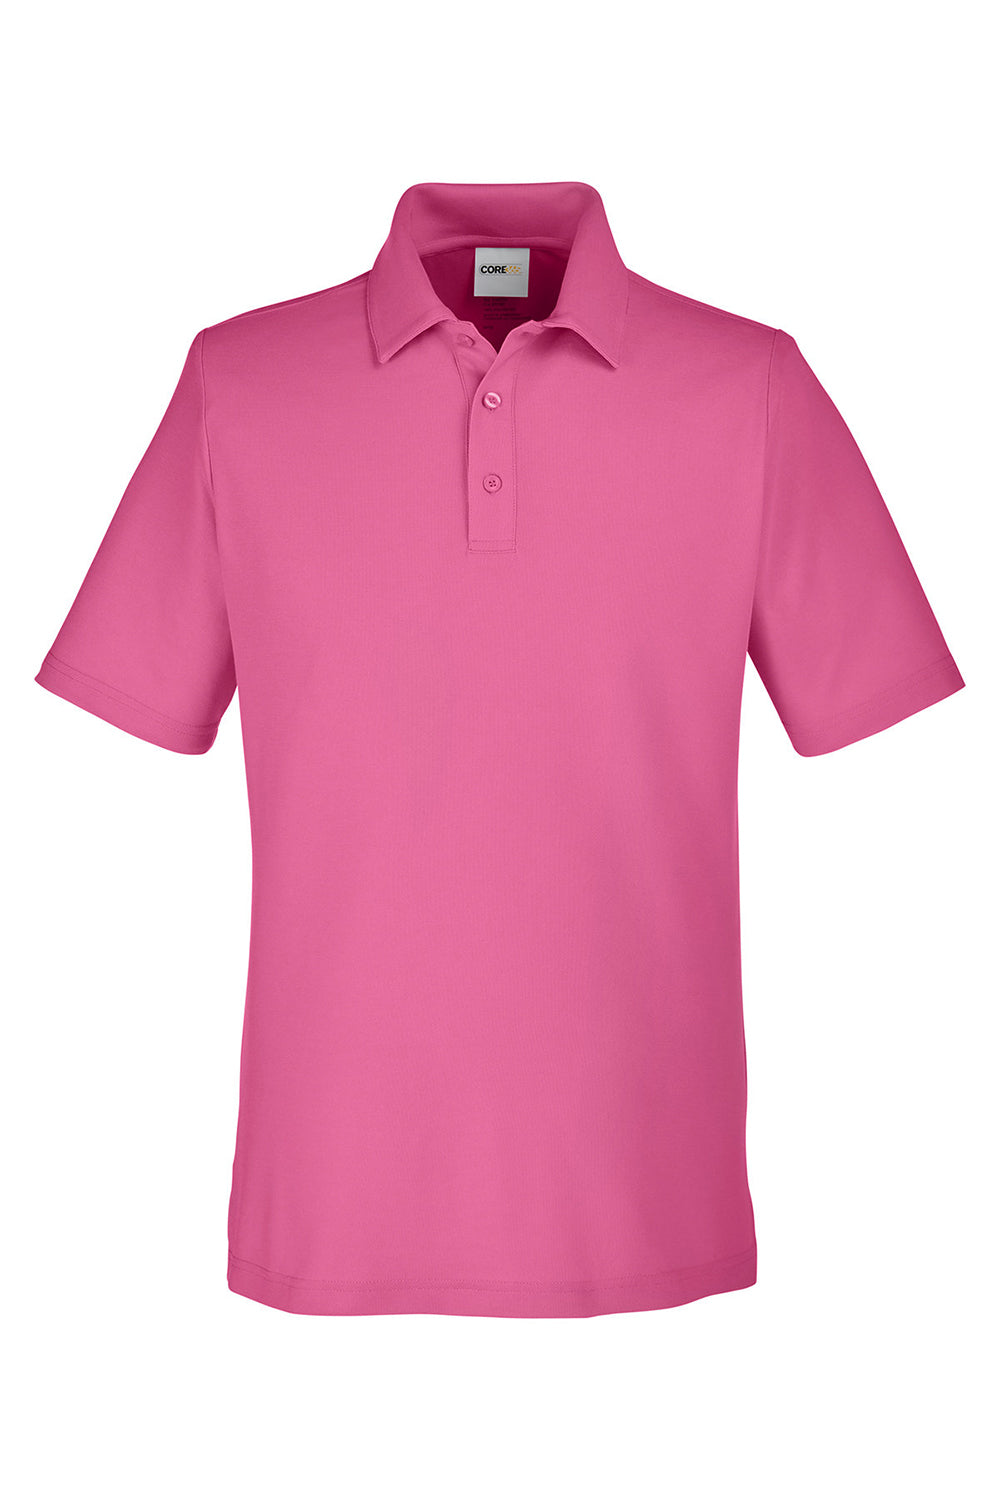 Core 365 CE112 Mens Fusion ChromaSoft Performance Moisture Wicking Short Sleeve Polo Shirt Charity Pink Flat Front